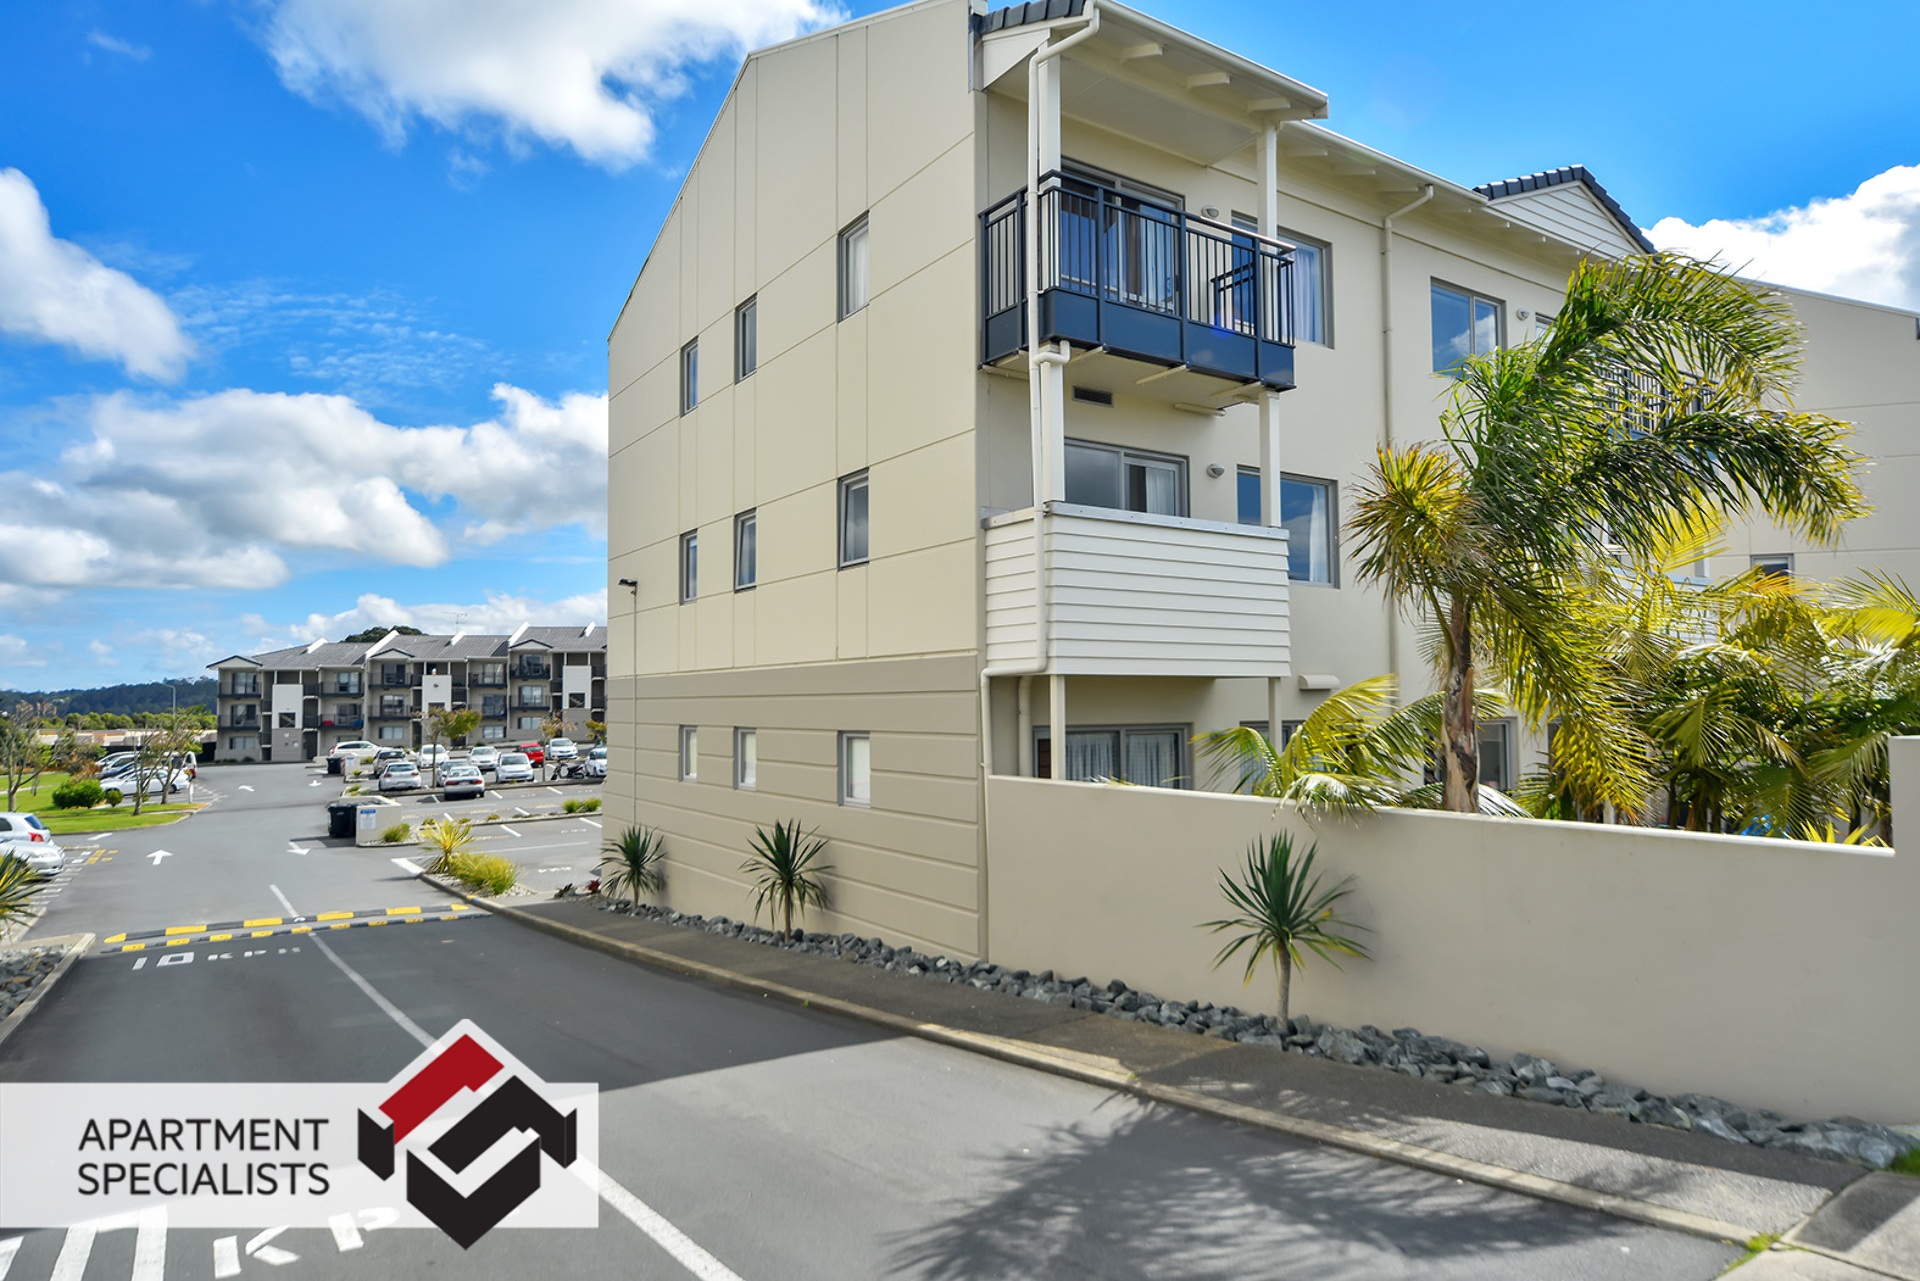 15 | 71 Spencer Road, Albany | Apartment Specialists